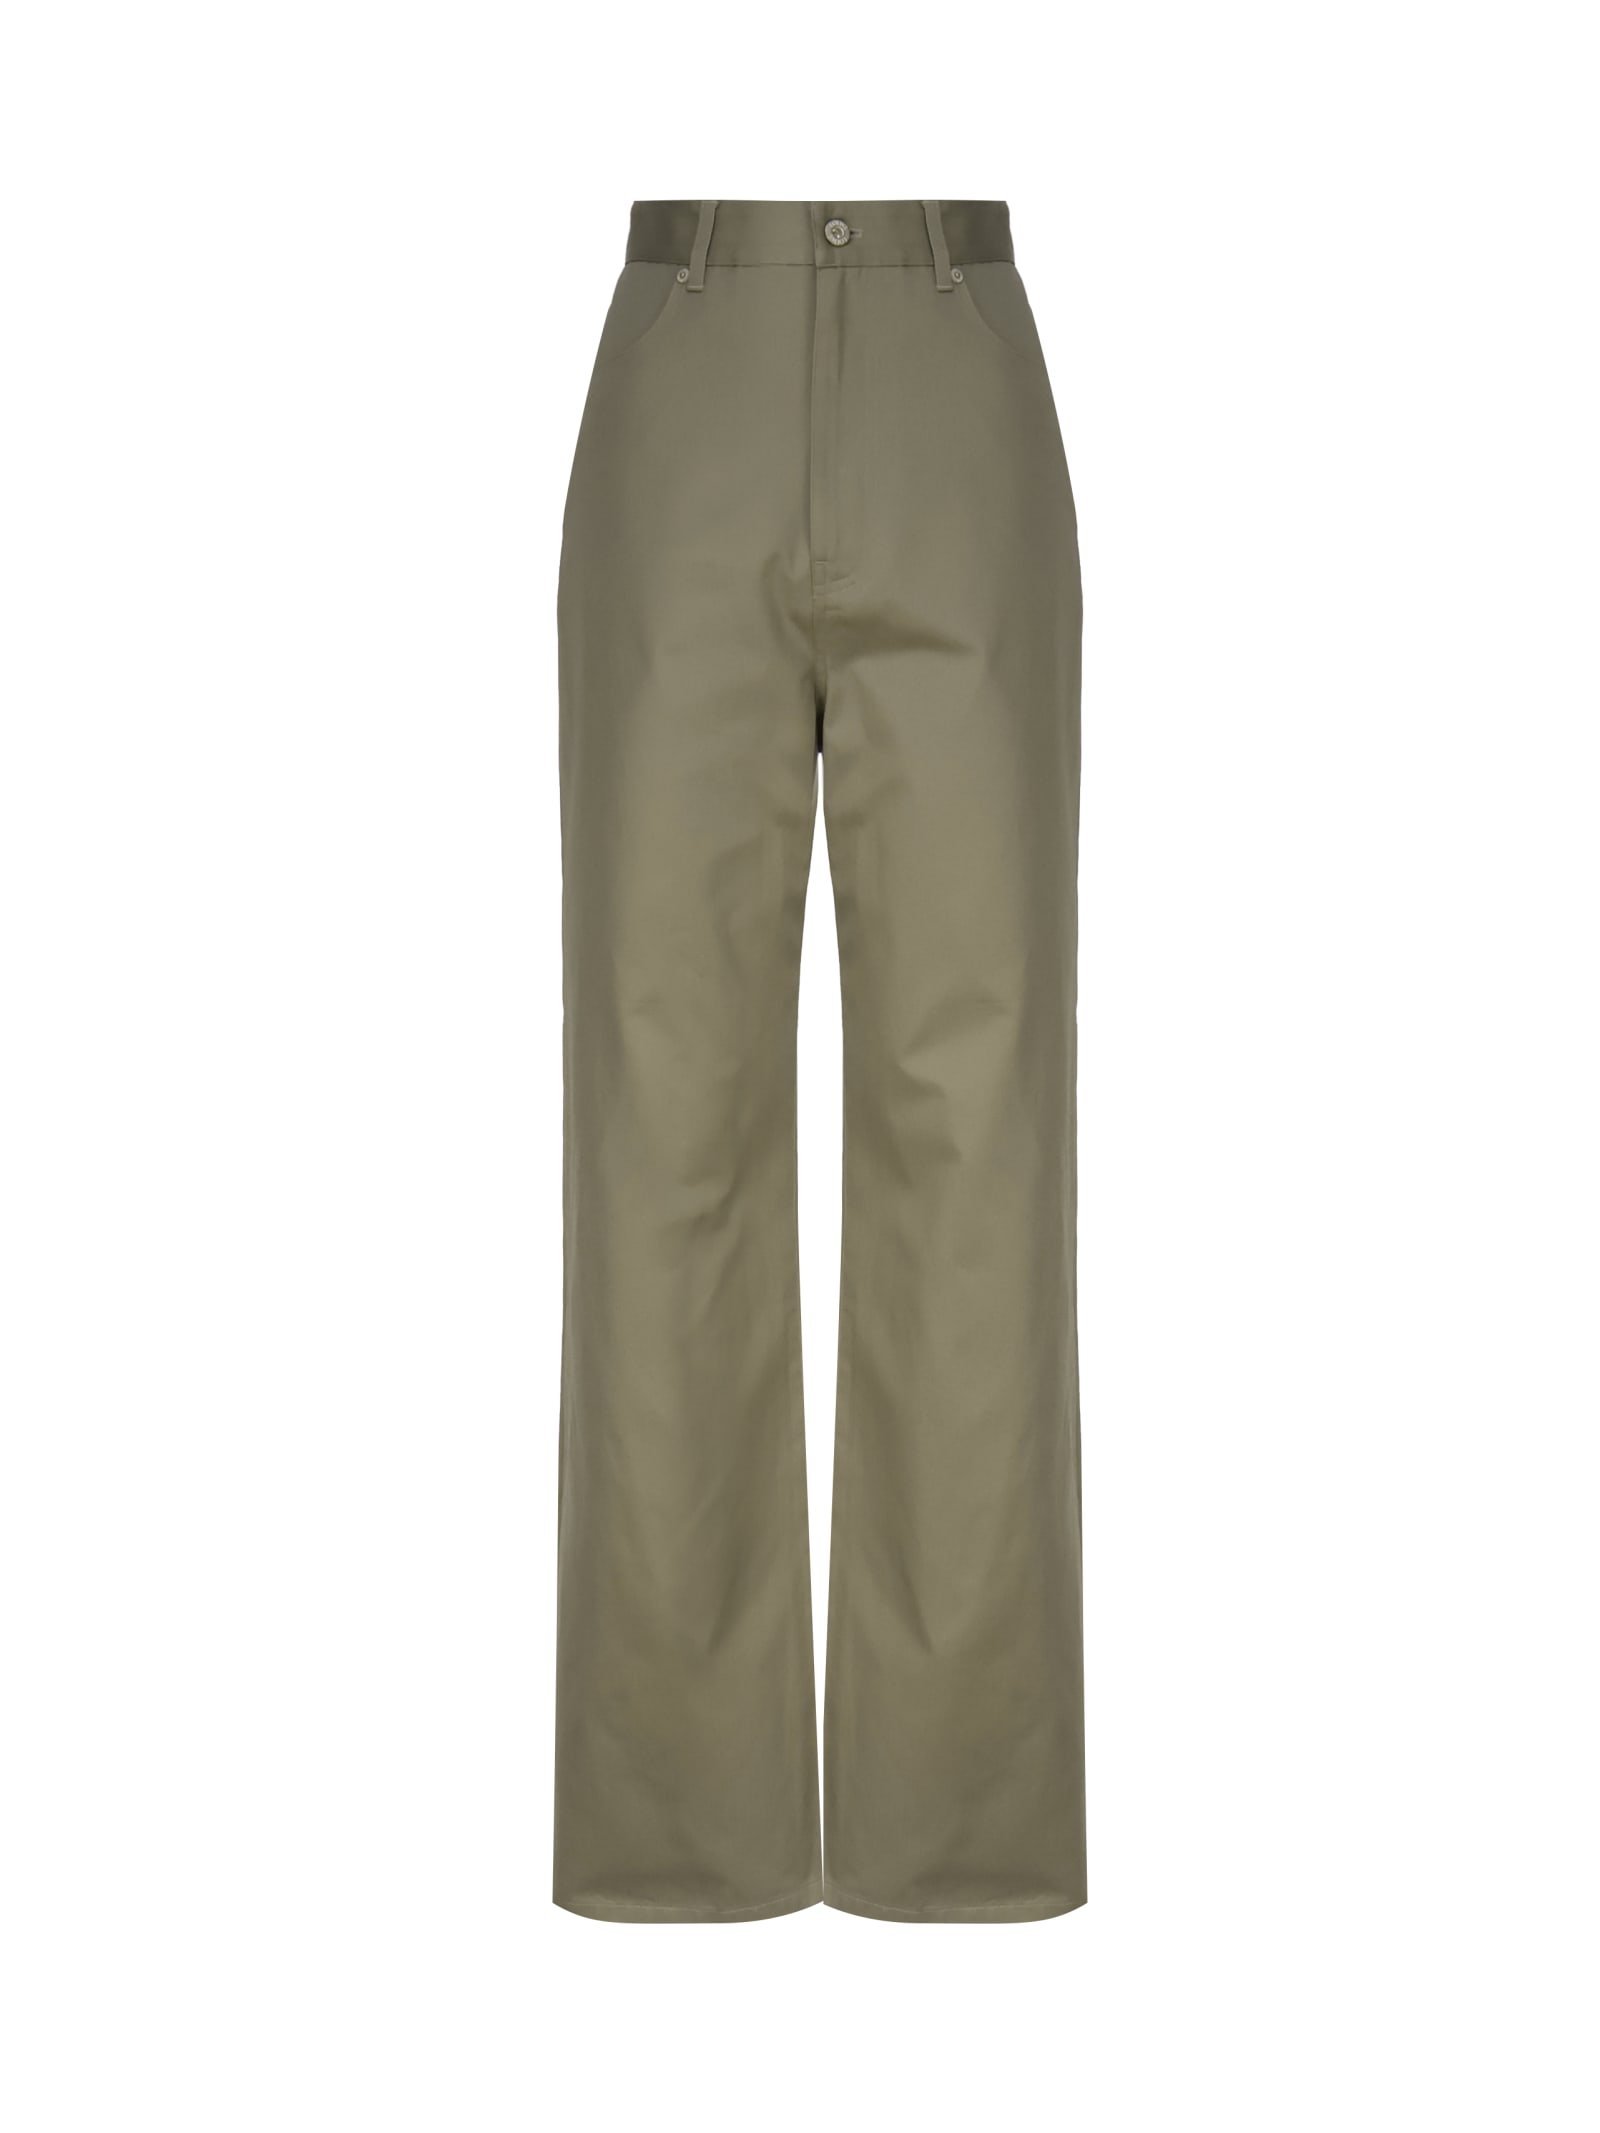 Shop Loewe Trousers Crafted In Lightweight Cotton Drill In Military Green